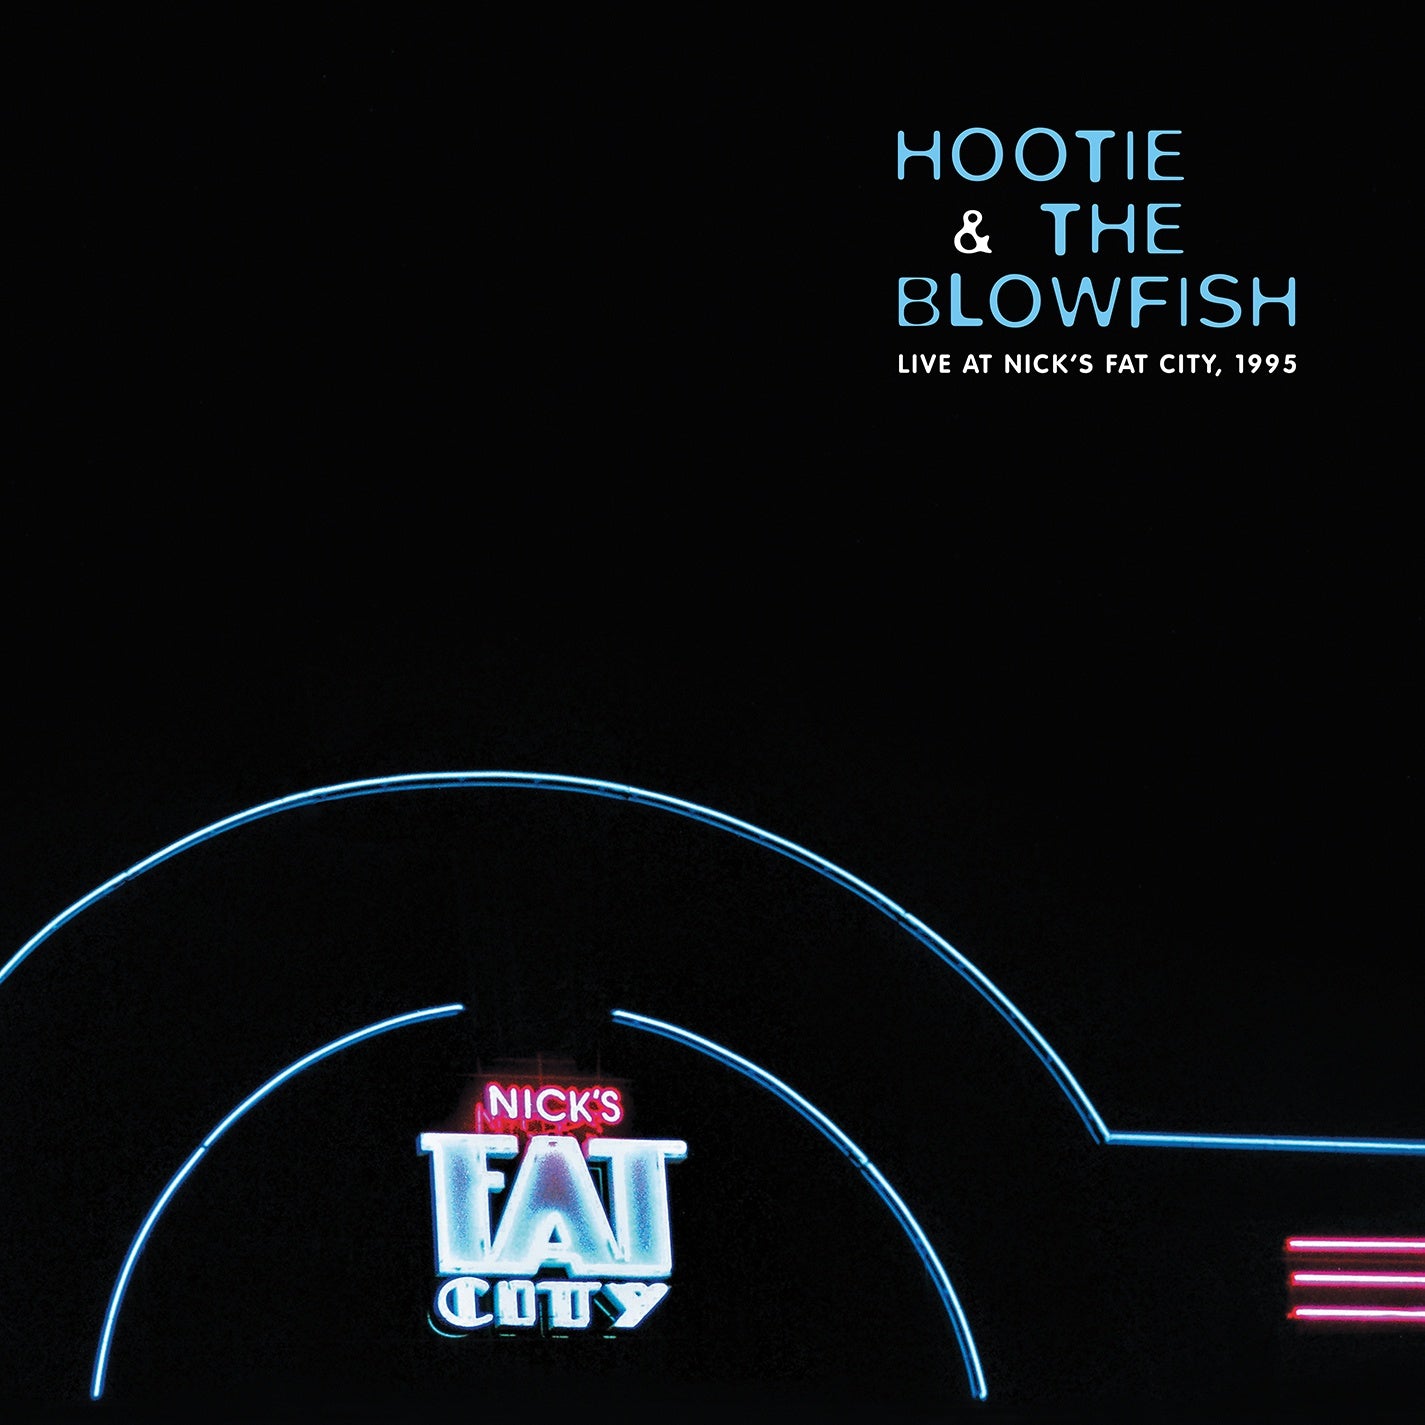 Hootie & The Blowfish - Live At Nick's Fat City, 1995 - New 2 Lp Record Store Day 2020 Rhino Europe Import RSD VInyl - Rock